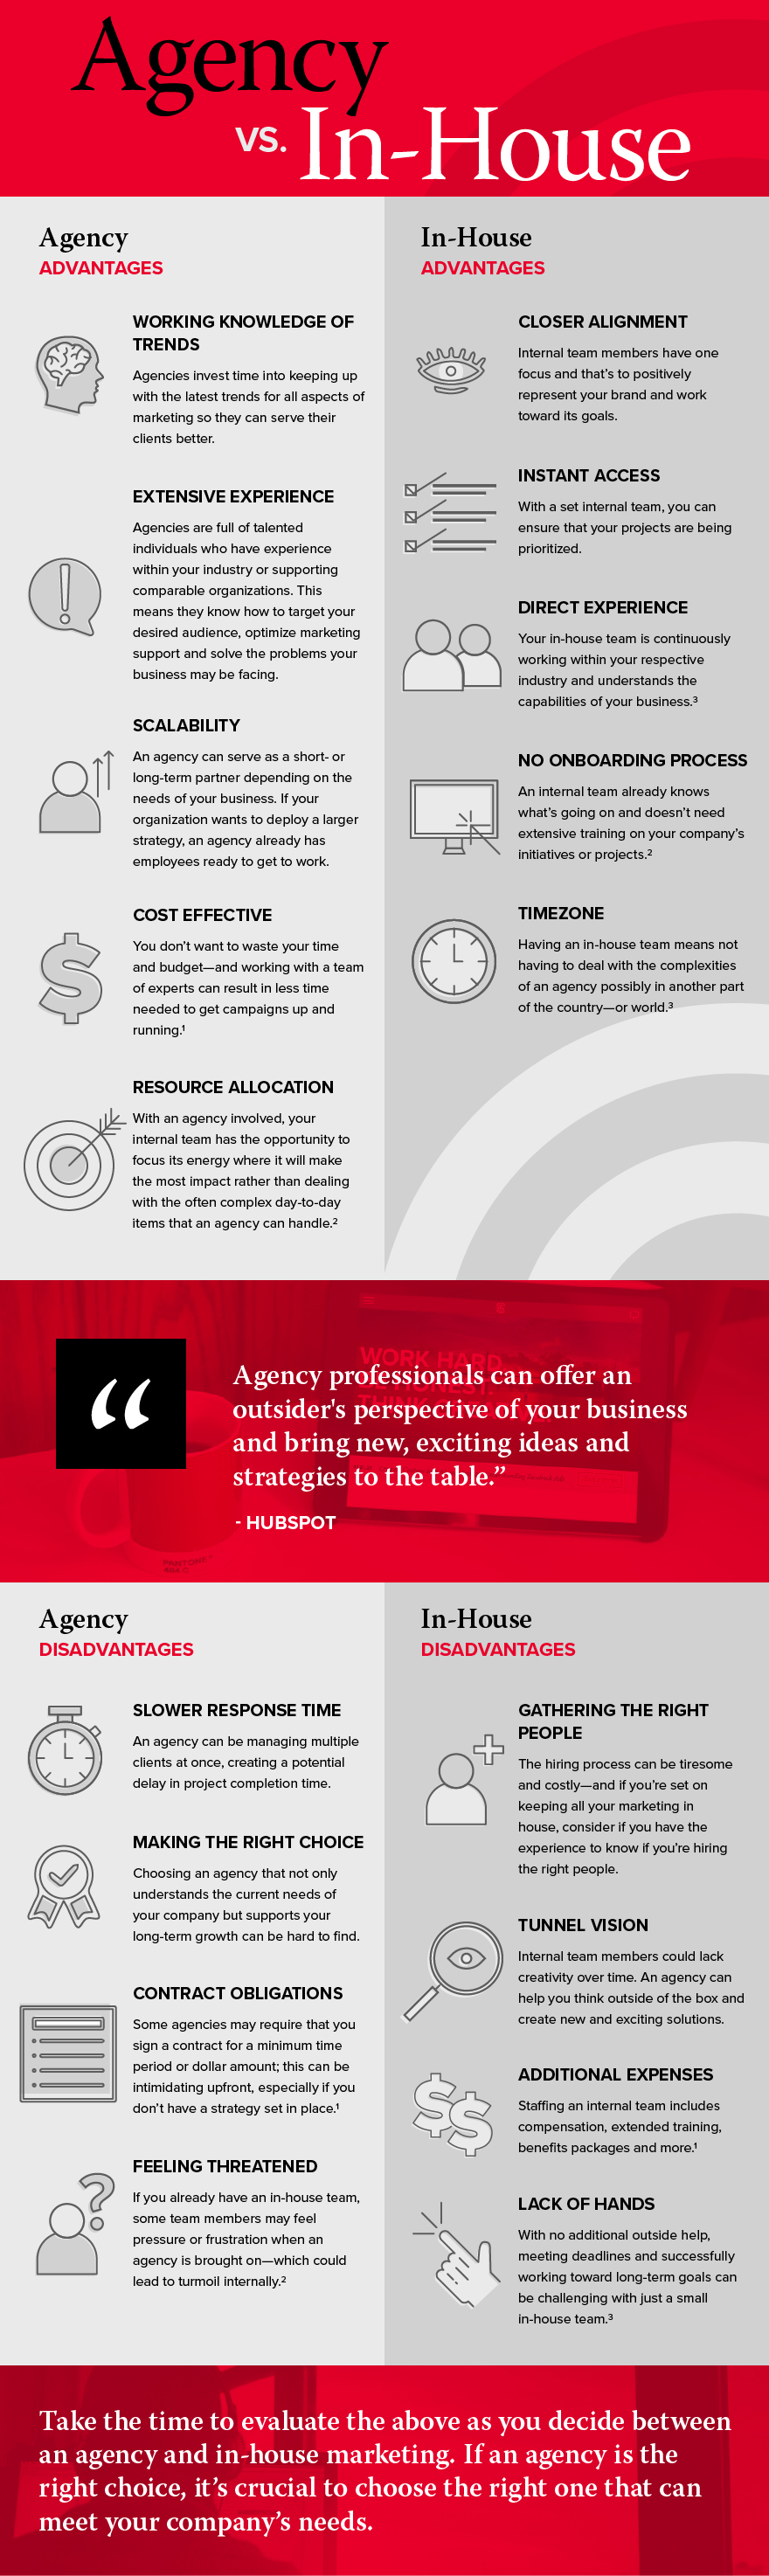 How to Choose Between an Agency or In-House Marketing